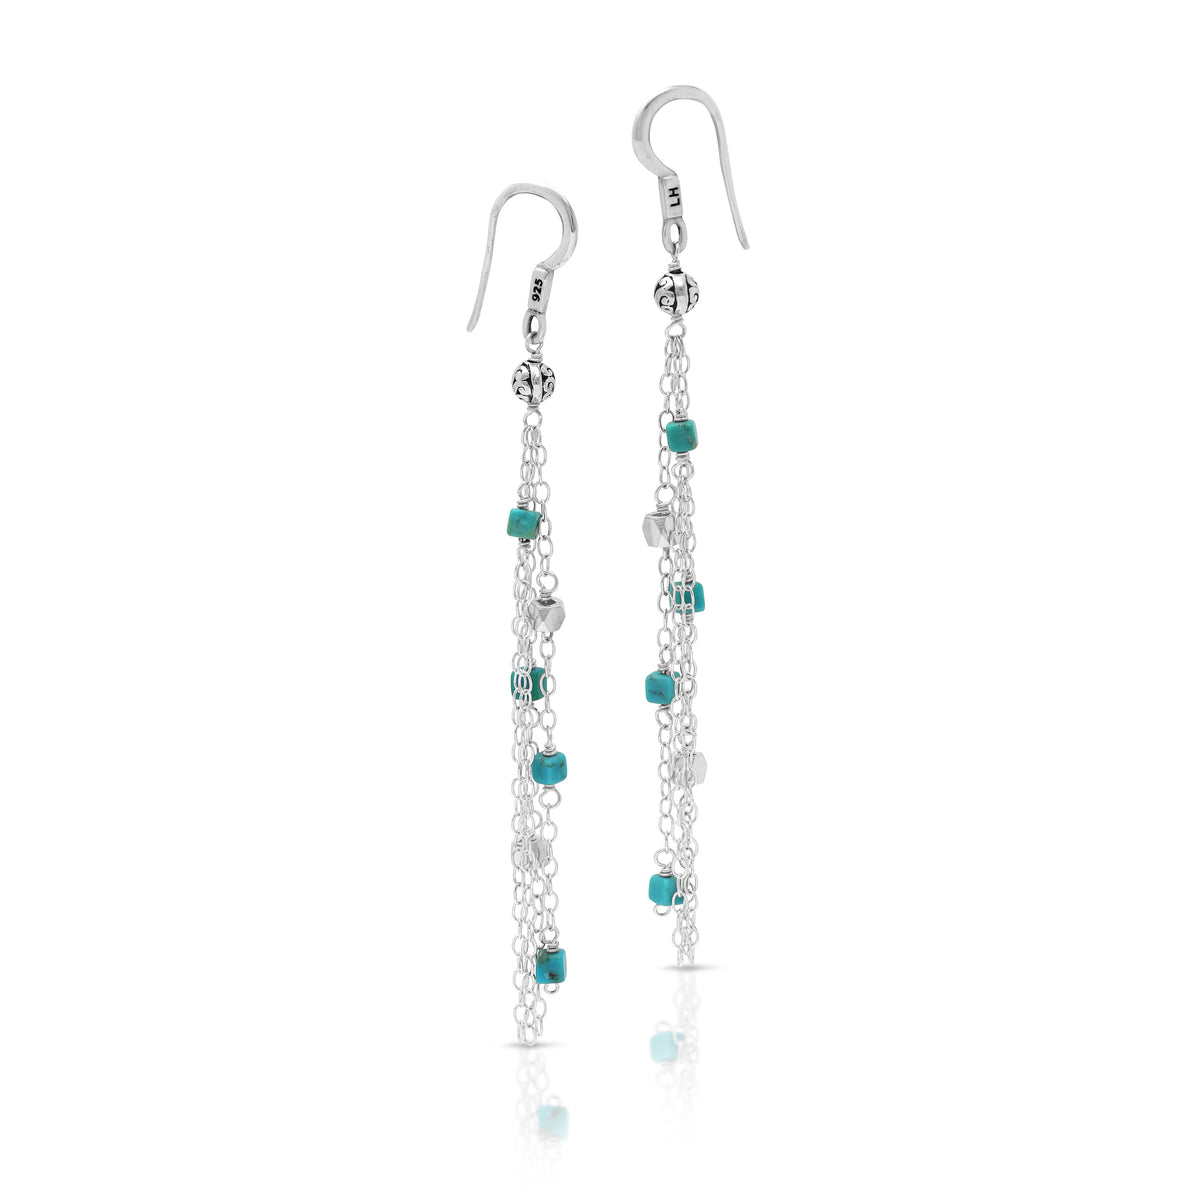 Multi Strand Turquoise & Silver Beads Chandelier Chain Earrings (72mm)